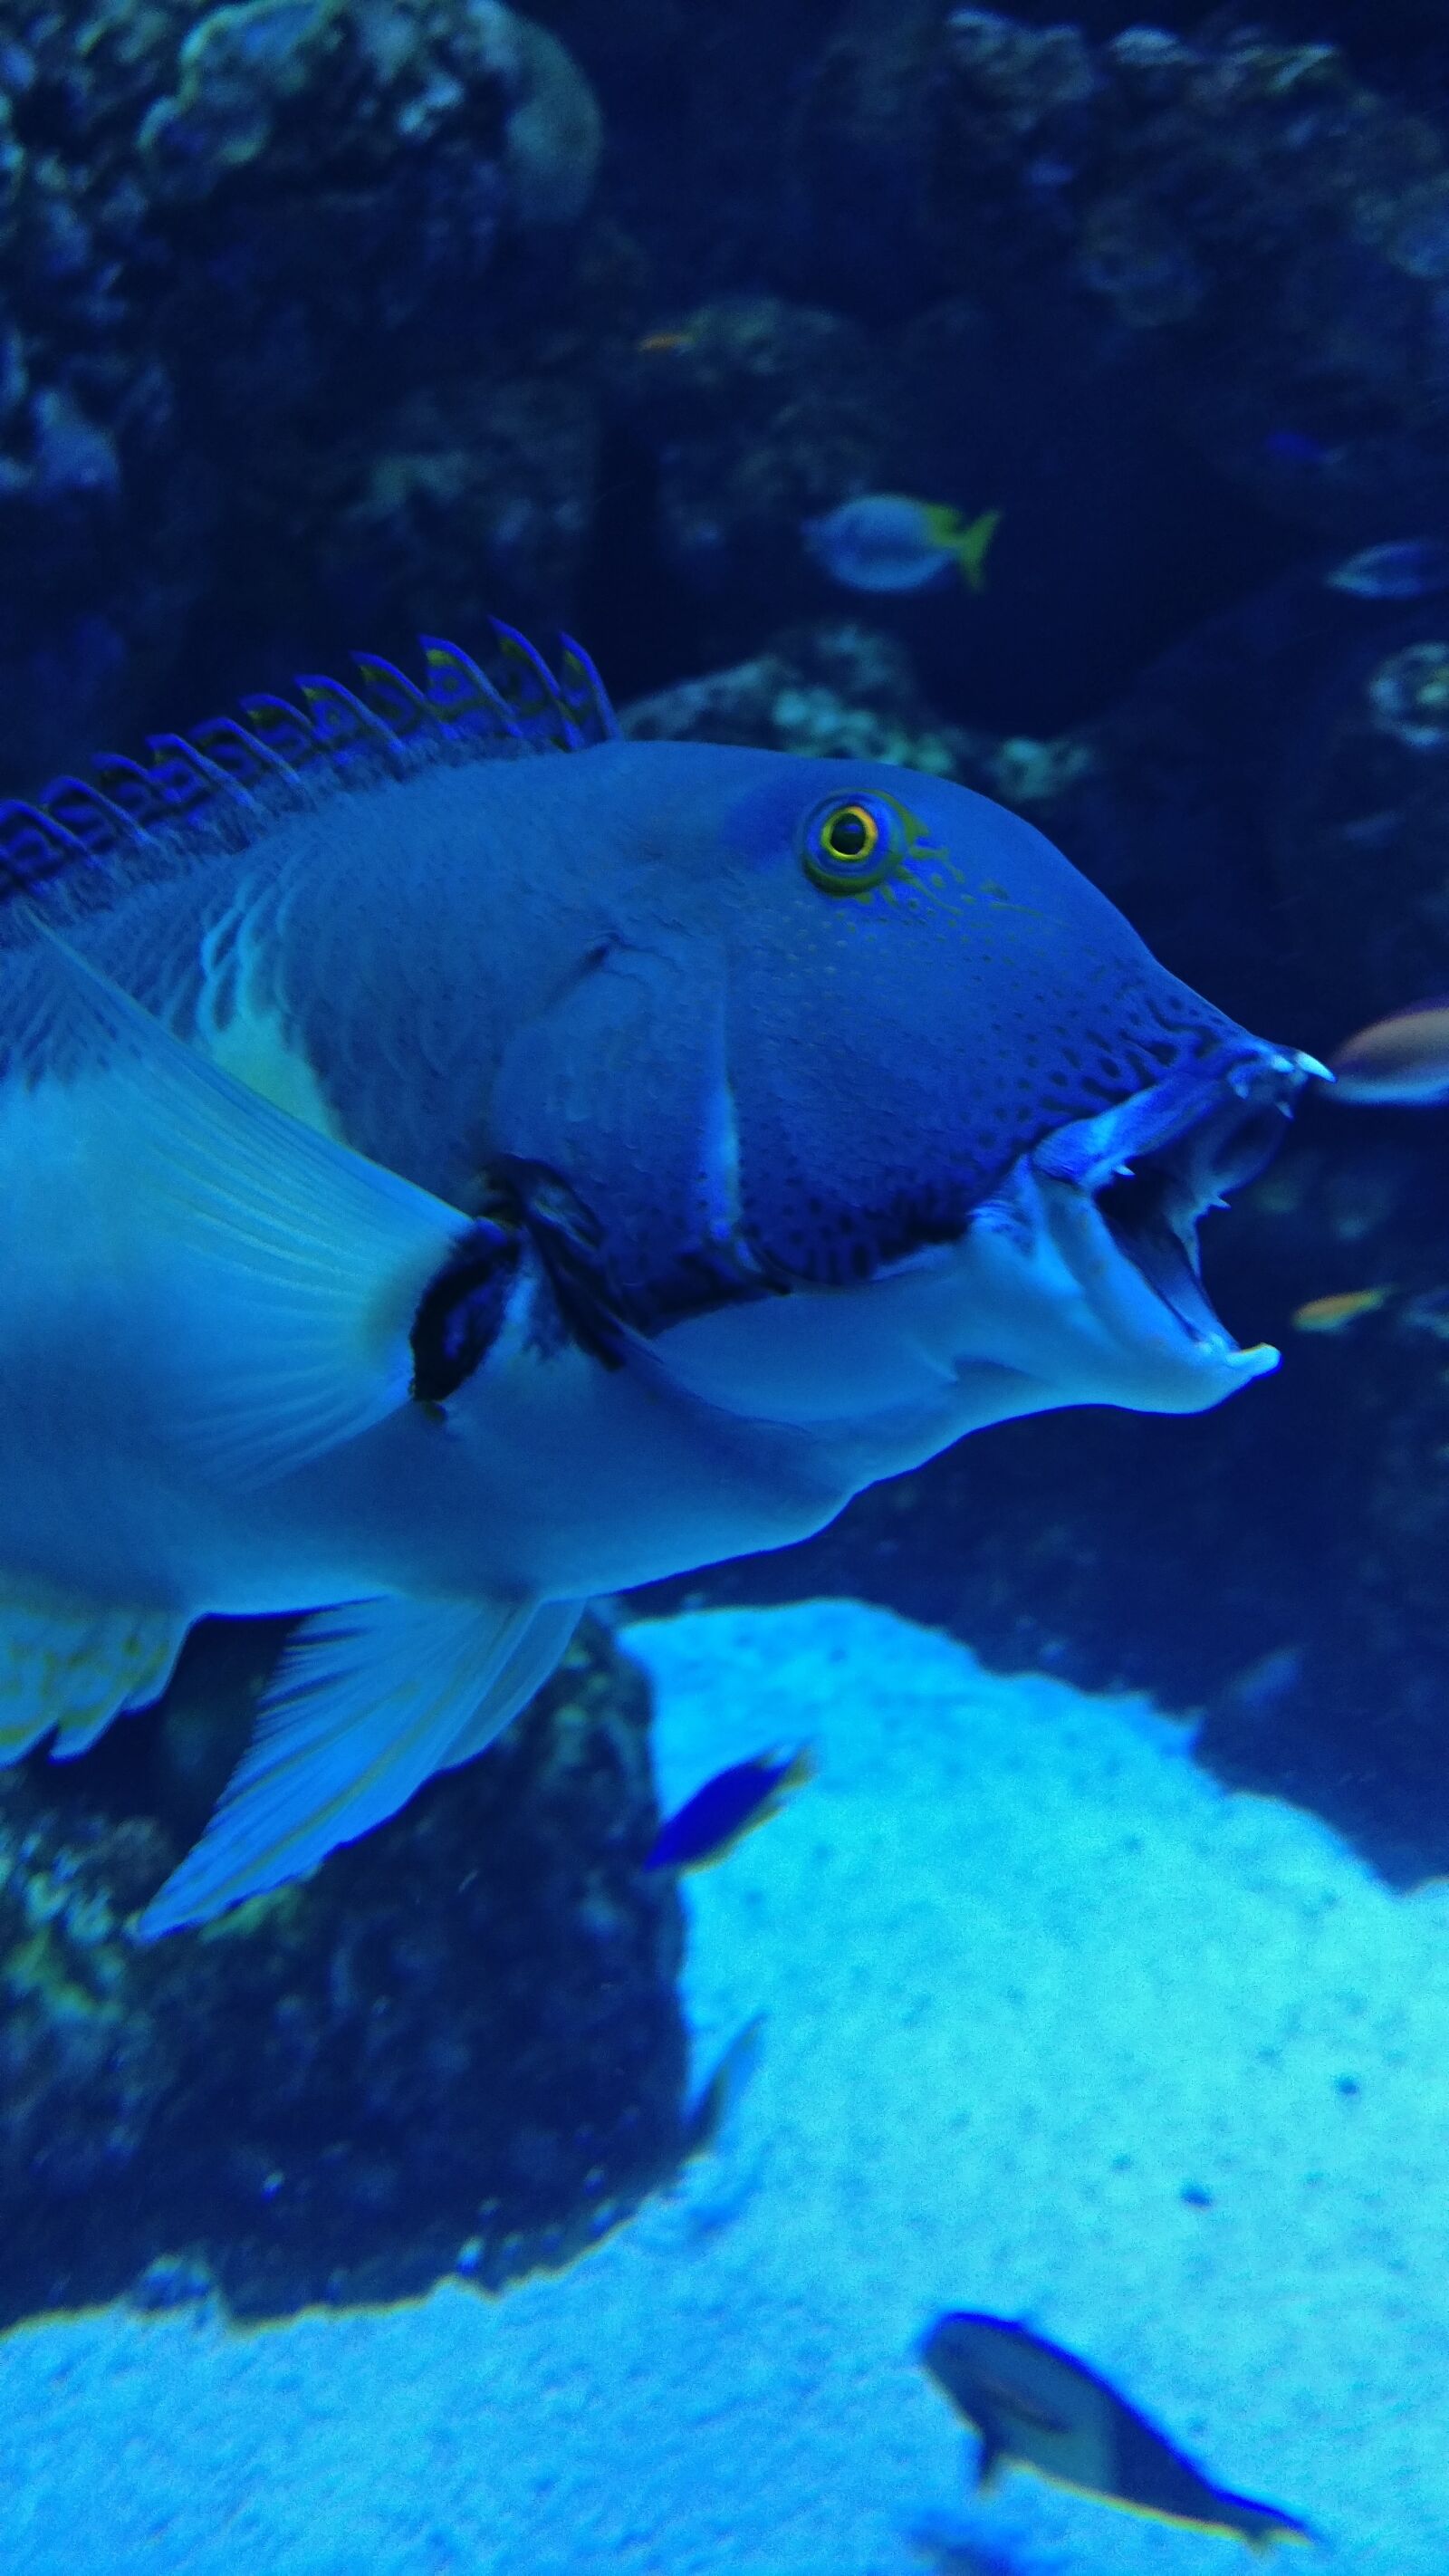 OnePlus A3000 sample photo. Great barrier reef, fish photography